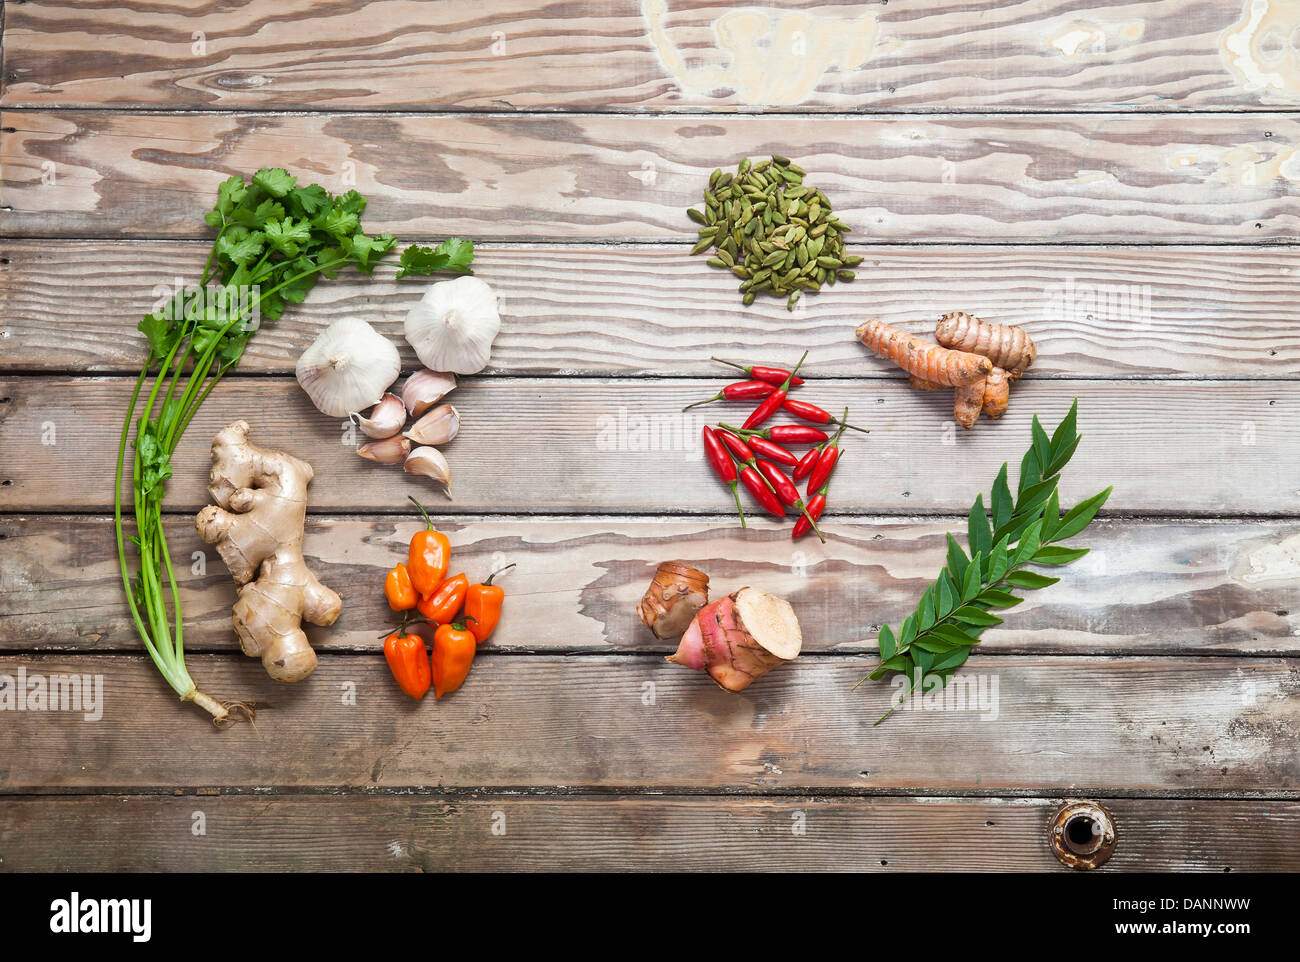 A variety of fresh herbs and spices laid out on a sanded wood surface: cardamom, ginger, chillies, garlic and tumeric. Stock Photo